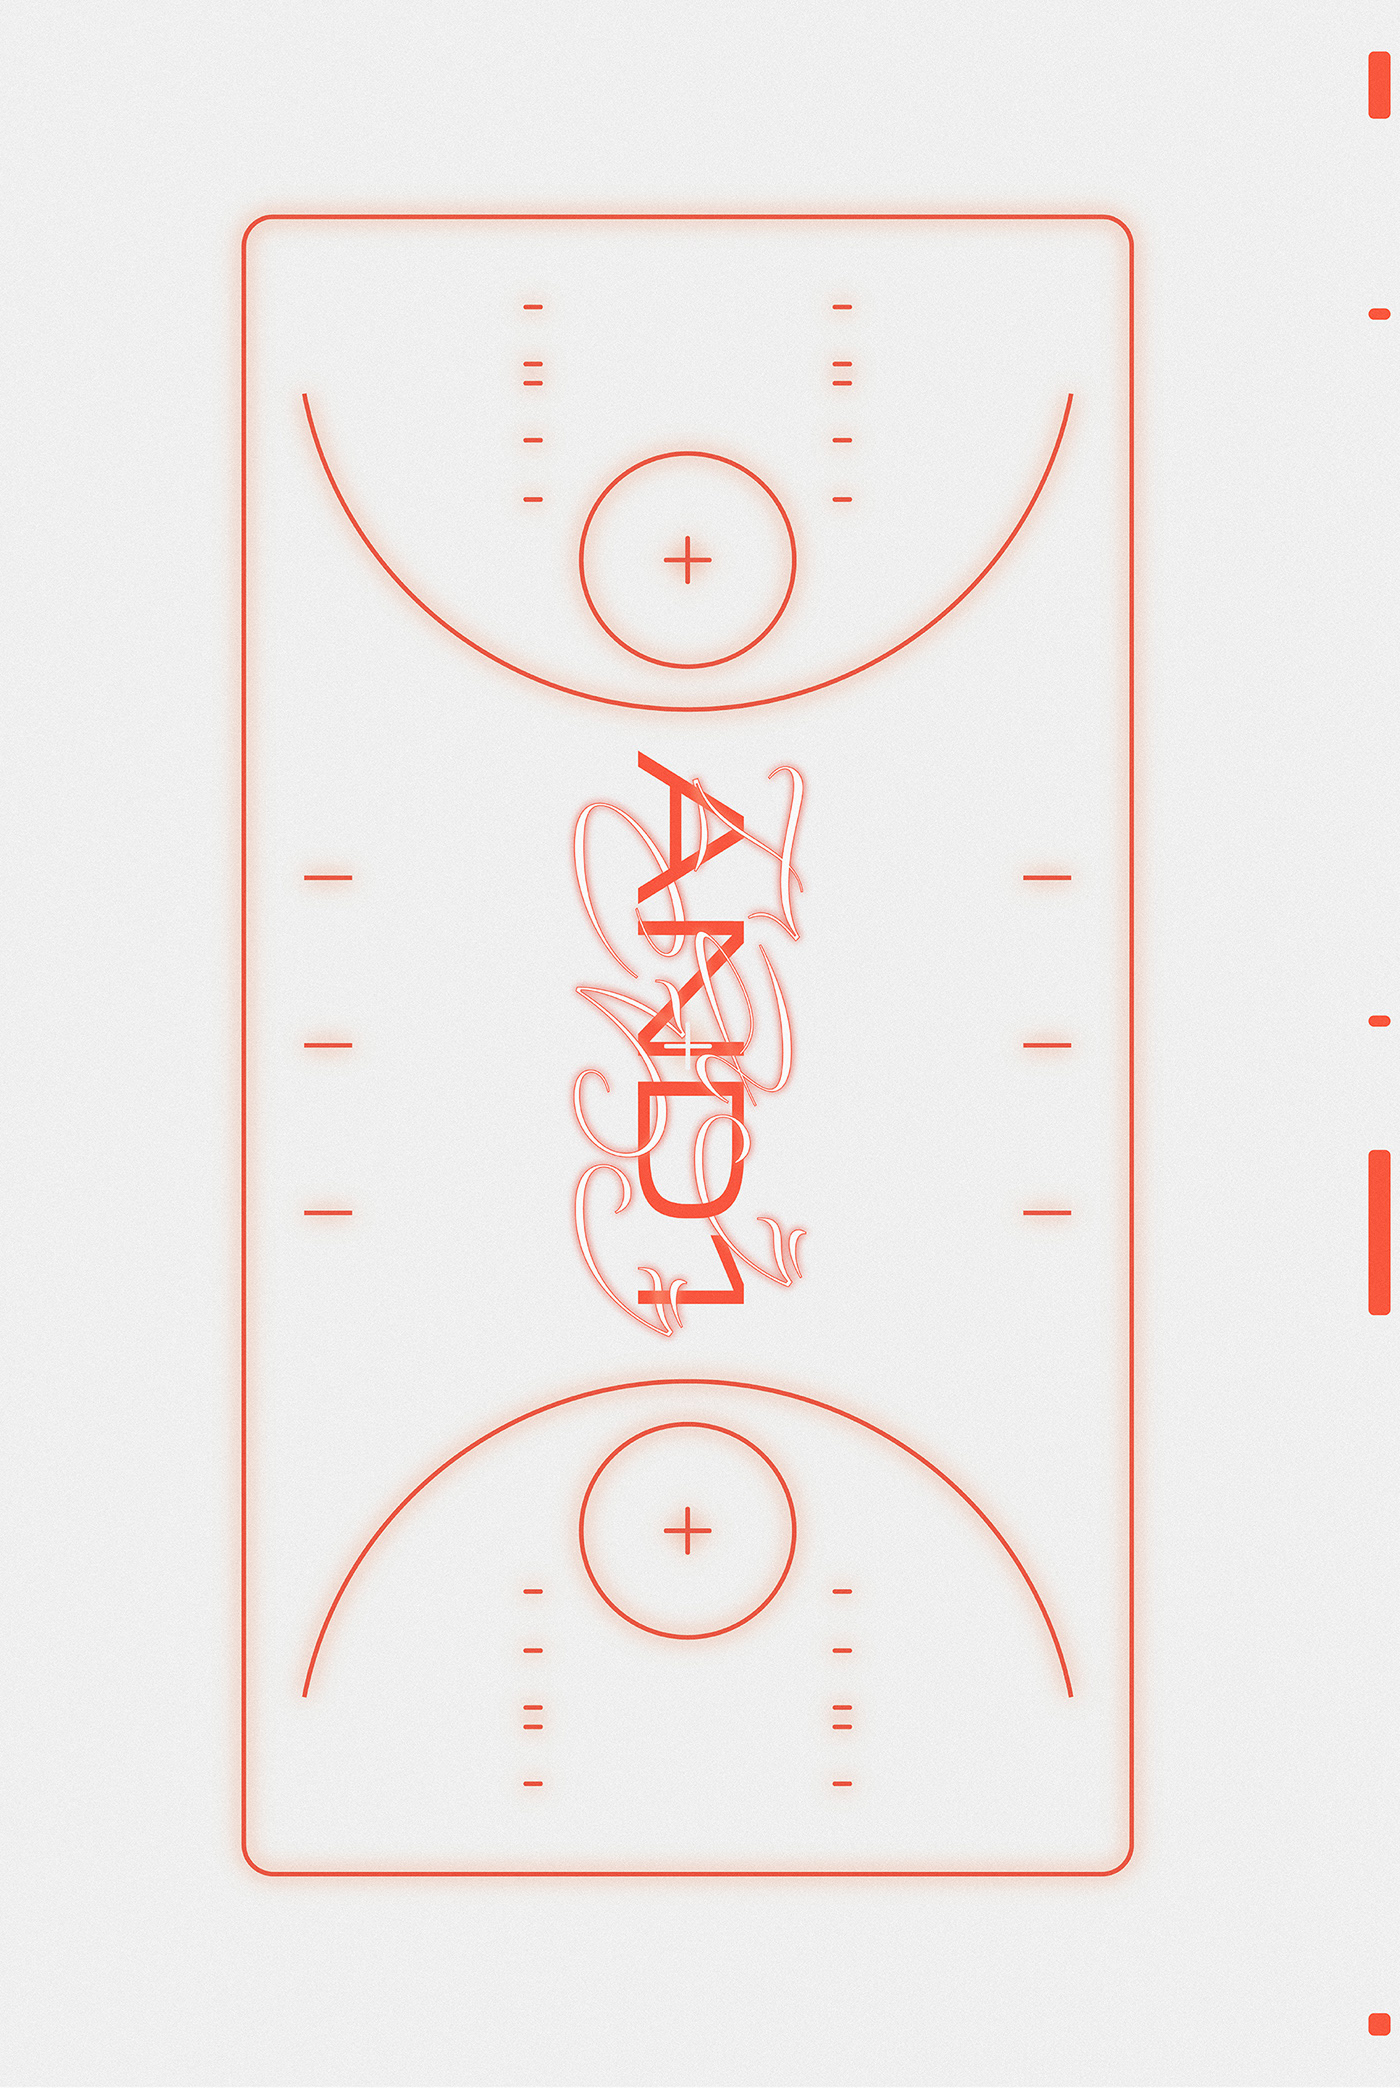 and1 basketball Experimental Typography nostra 1.0 posterdesign sport Street Basket TAICHI typography   vince carter